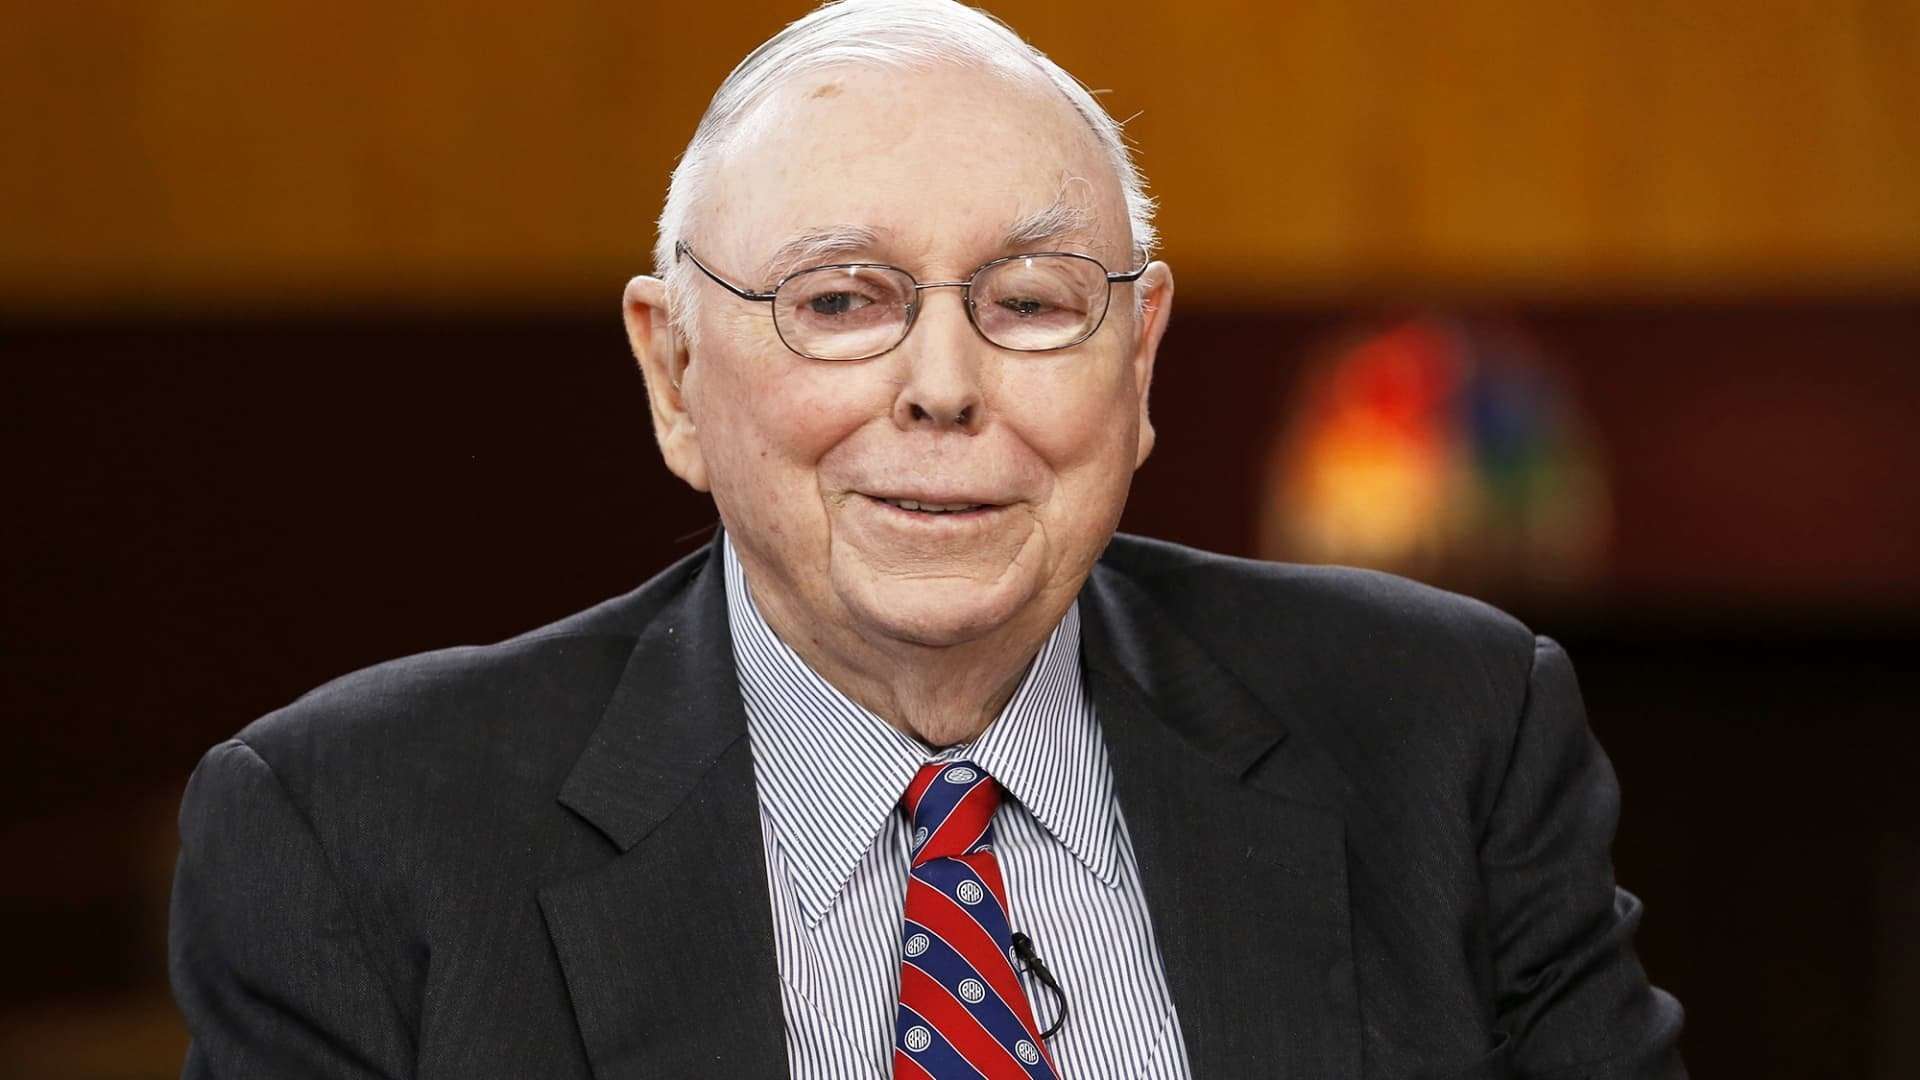 image for Charlie Munger, investing genius and Warren Buffett's right-hand man, dies at age 99